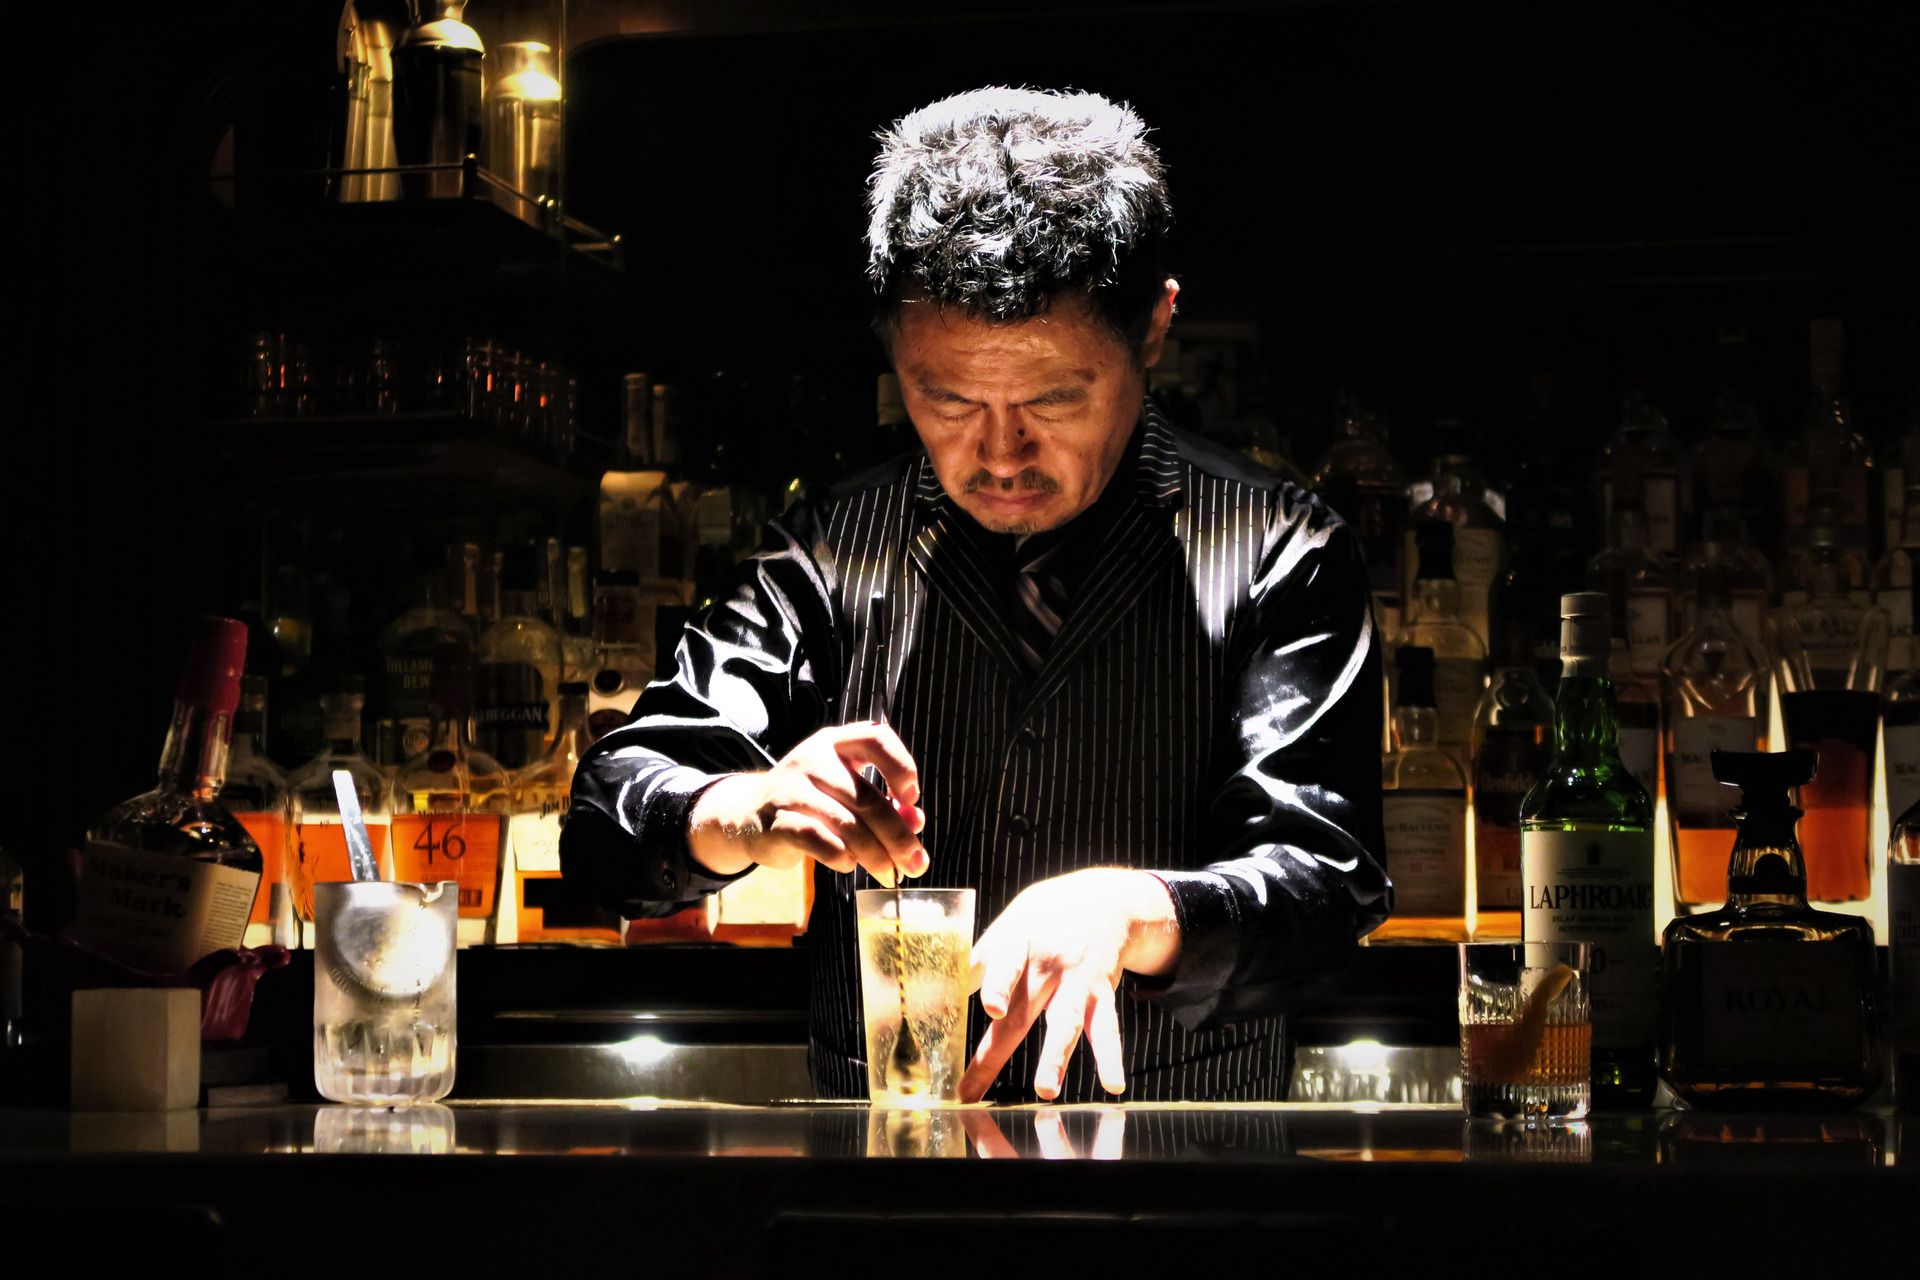 Suntory Whisky Carved the World's Most Incredible Ice Cubes